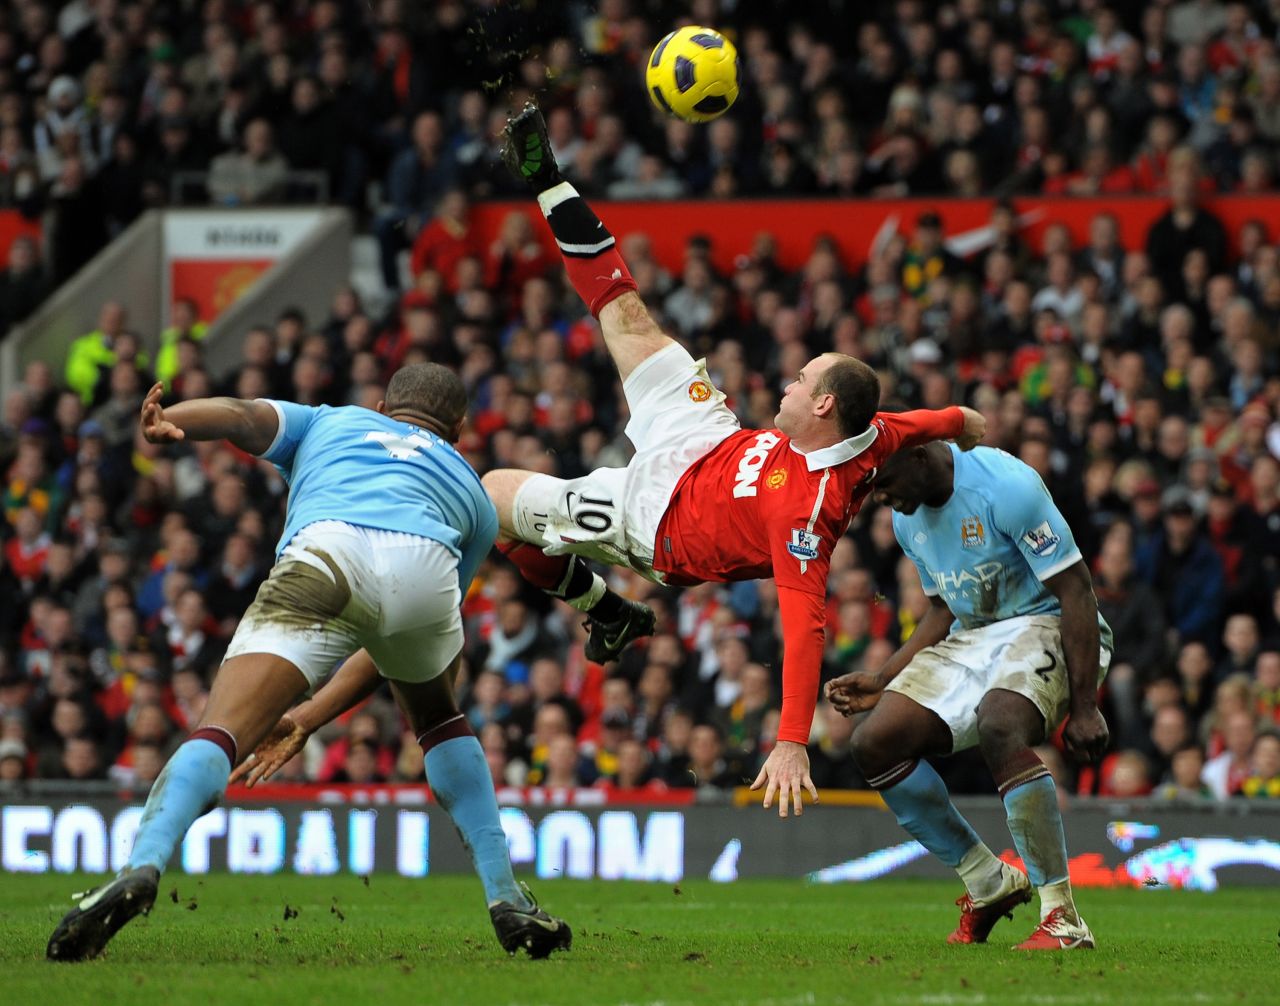 Rooney scores an outstanding bicycle kick for  Manchester United against fierce city rivals Manchester City at Old Trafford in Manchester on February 12, 2011.